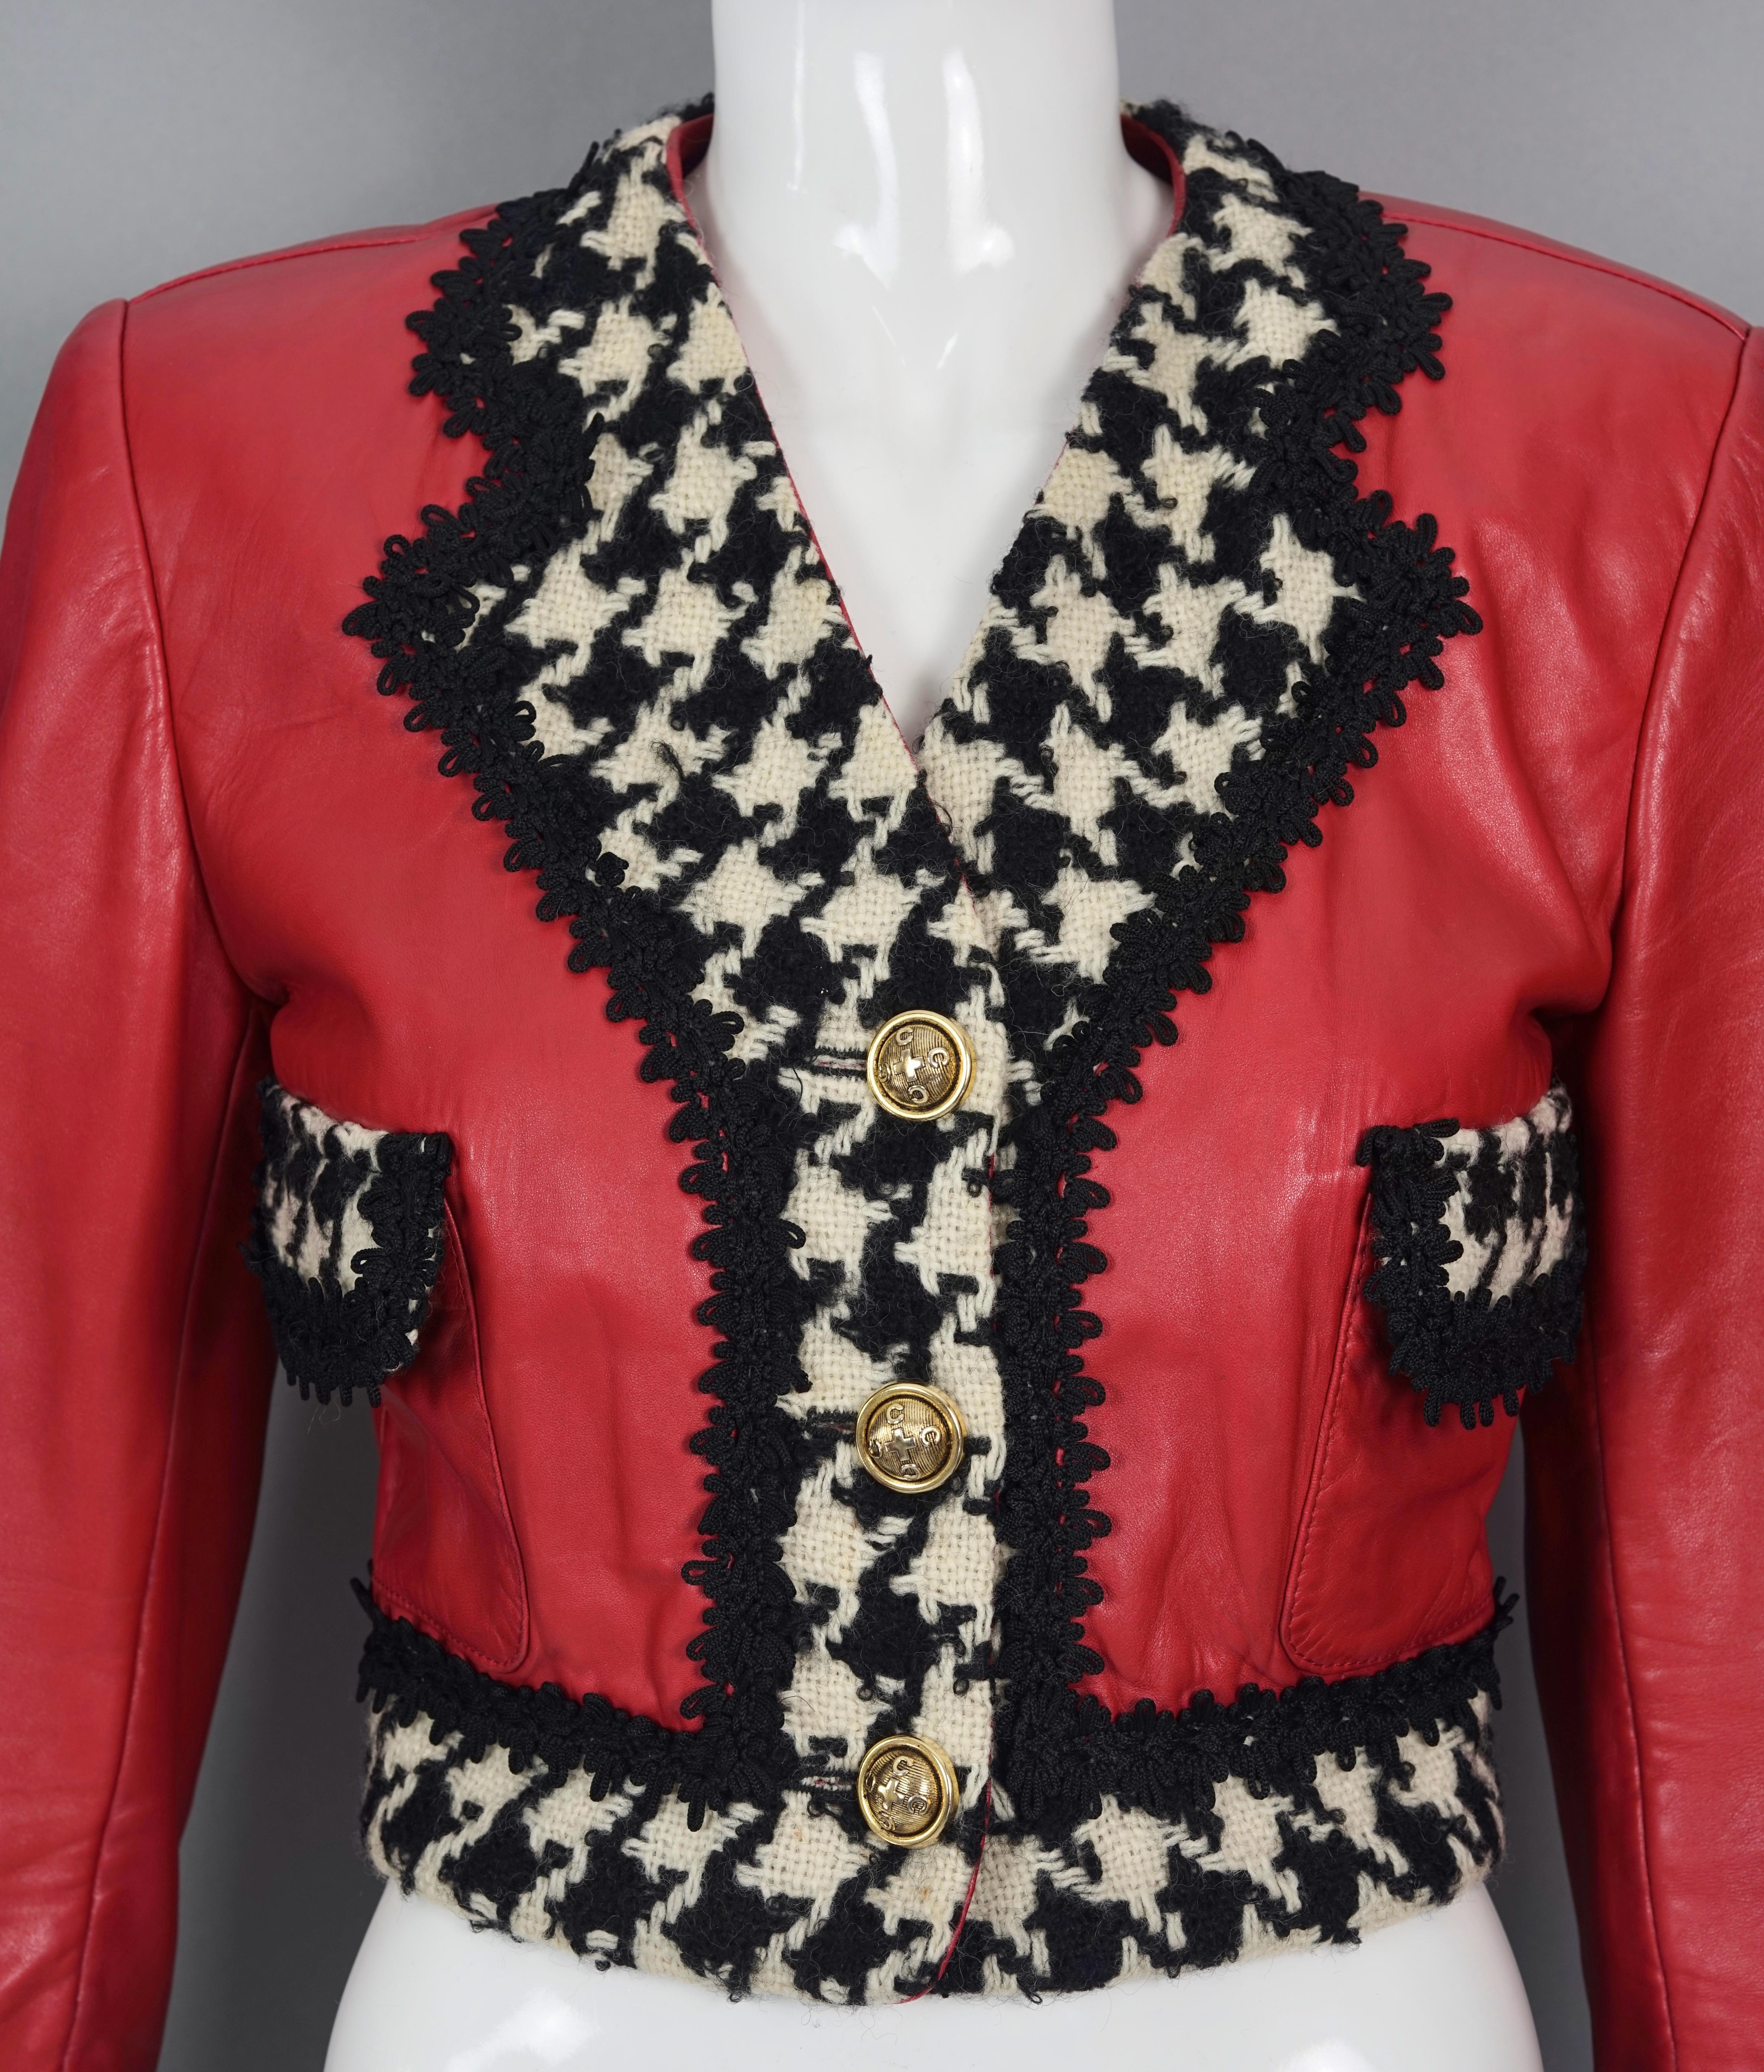 Vintage MOSCHINO CHEAP and CHIC Houndstooth Red Leather Cropped Jacket 5